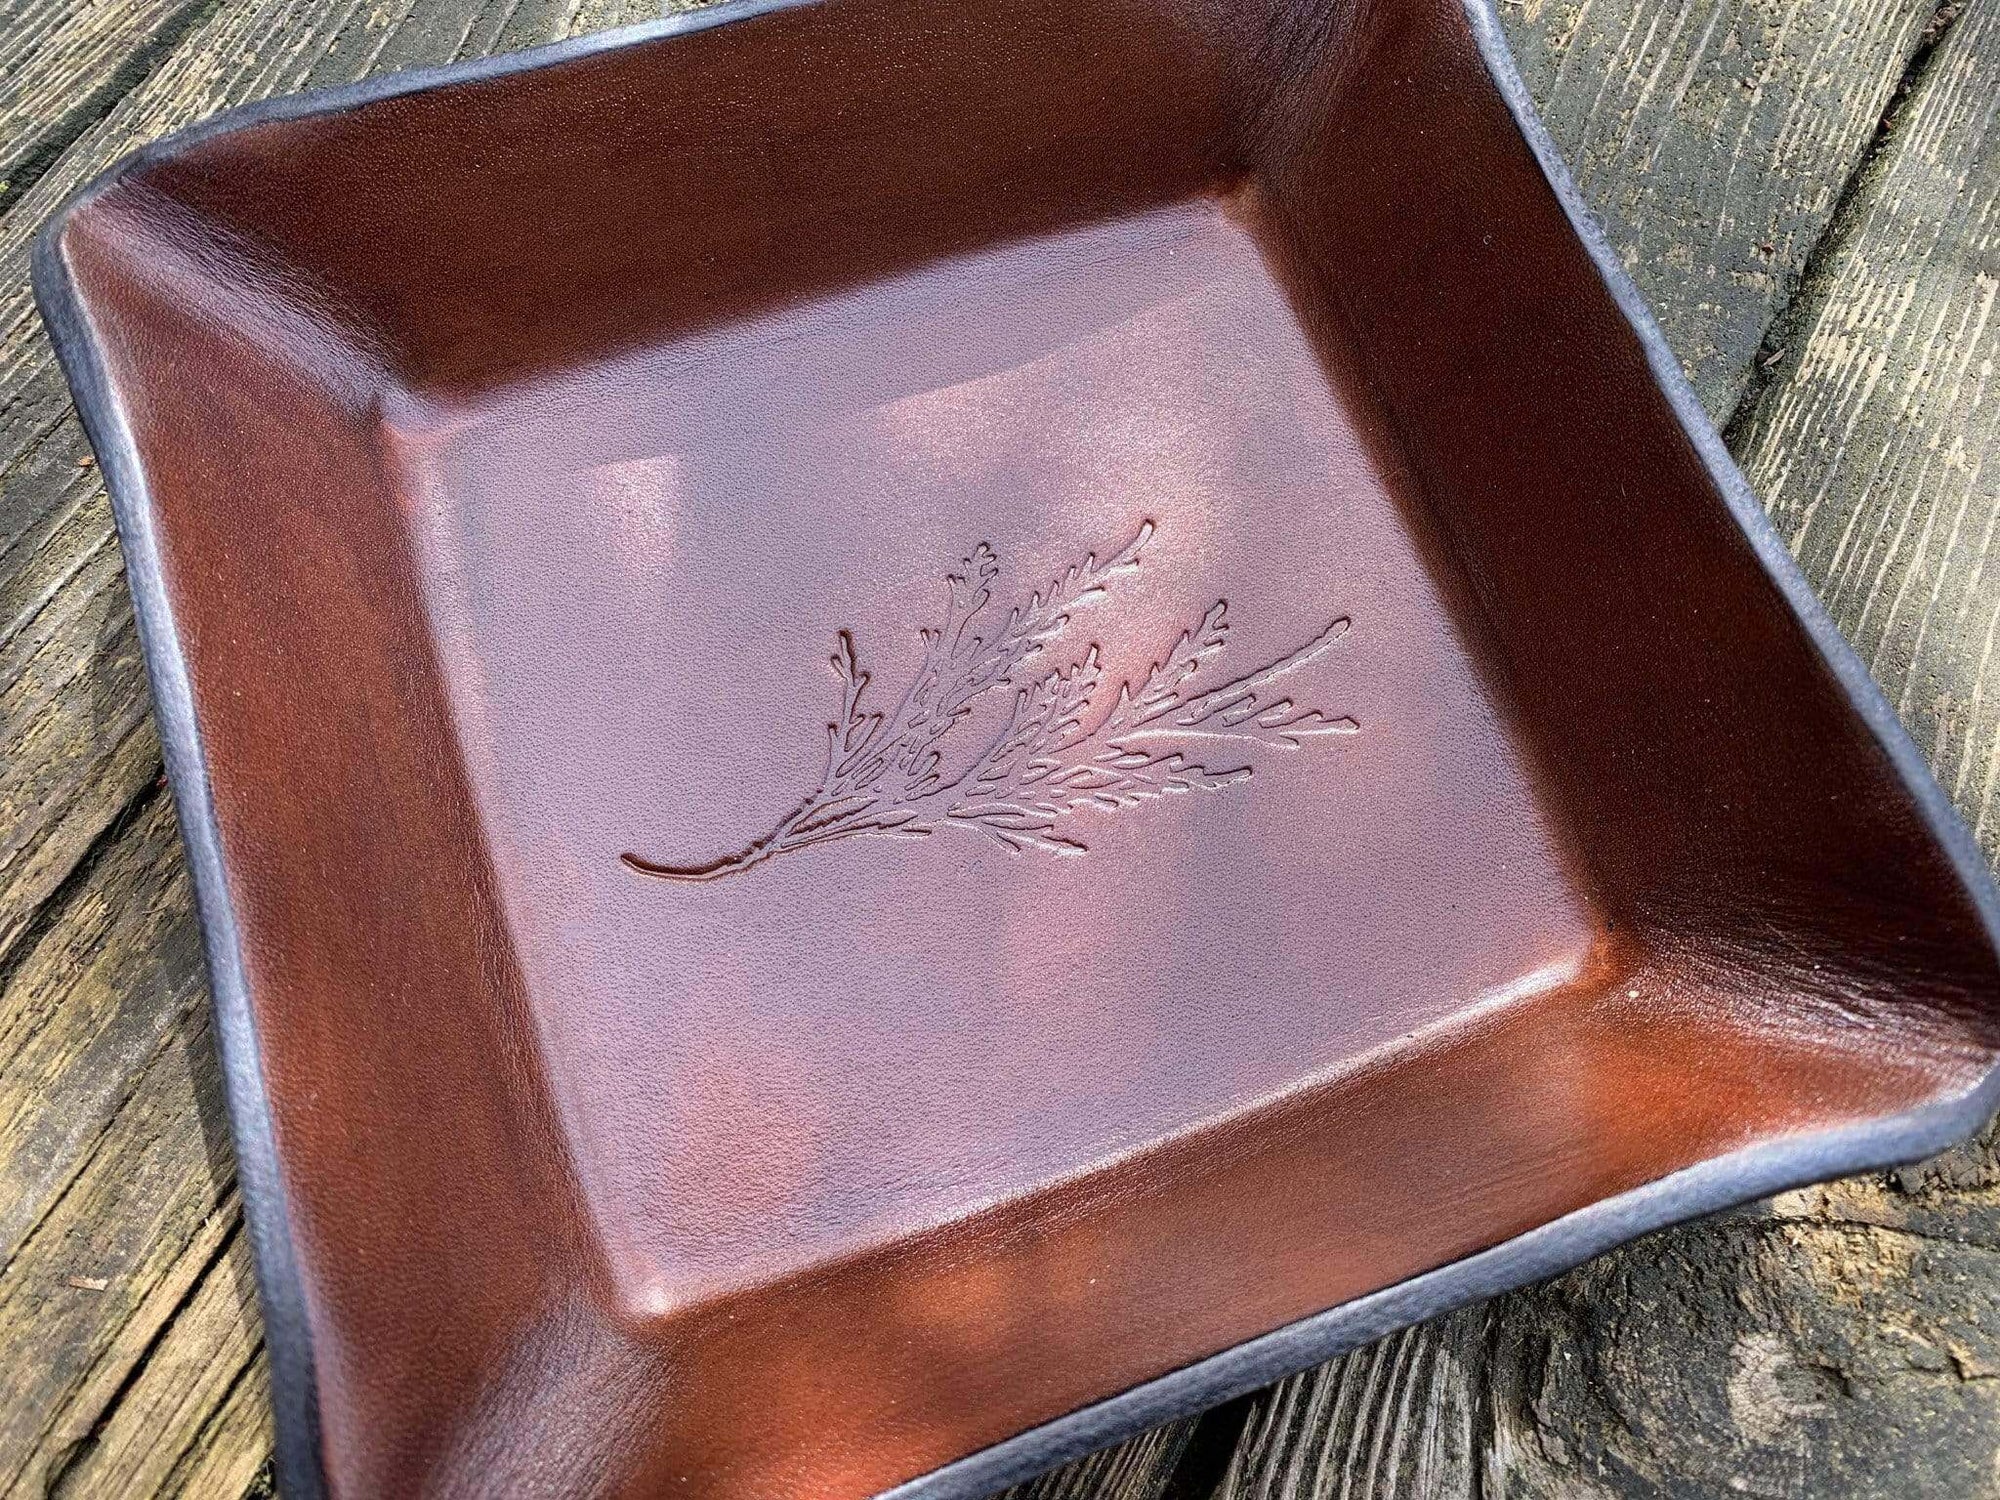 Leather valet tray with cedar branch image. Detail.